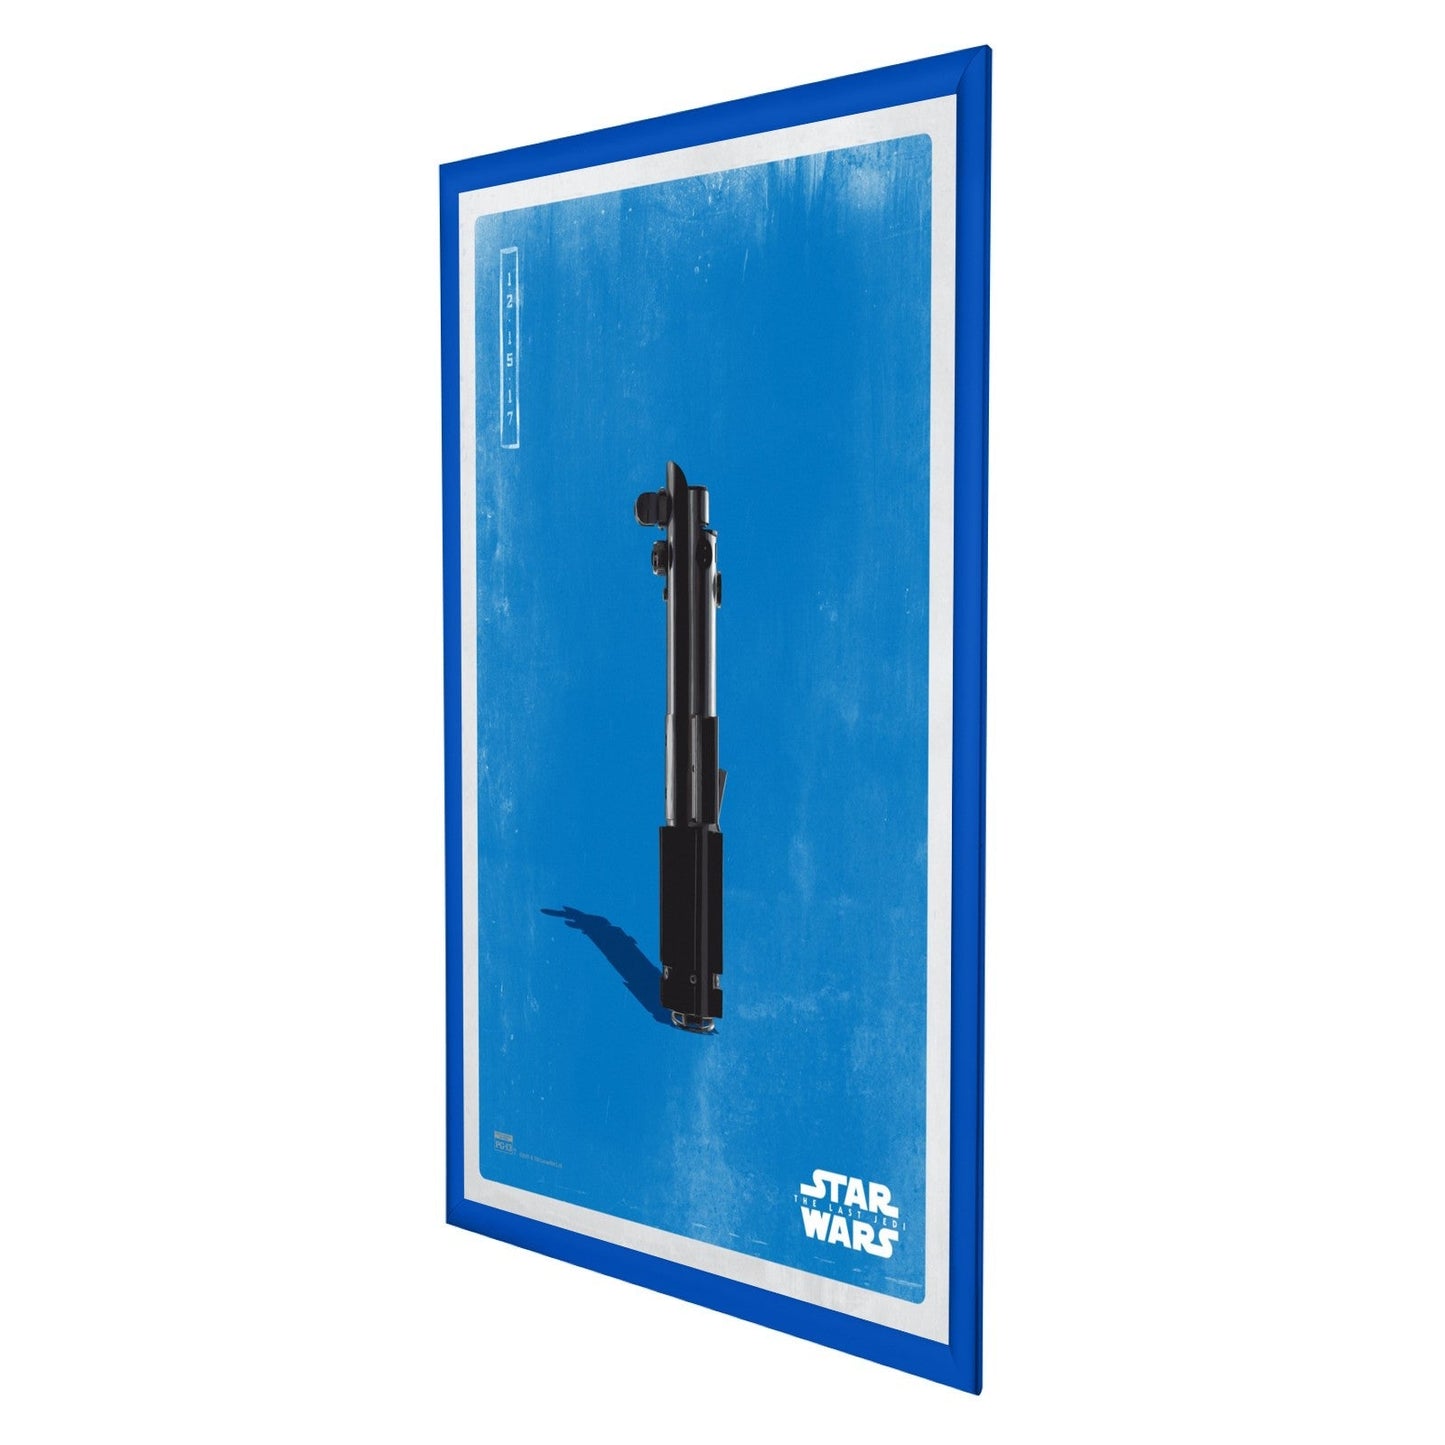 Load image into Gallery viewer, 24x36 Blue SnapeZo® Snap Frame - 1.2&amp;quot; Profile
